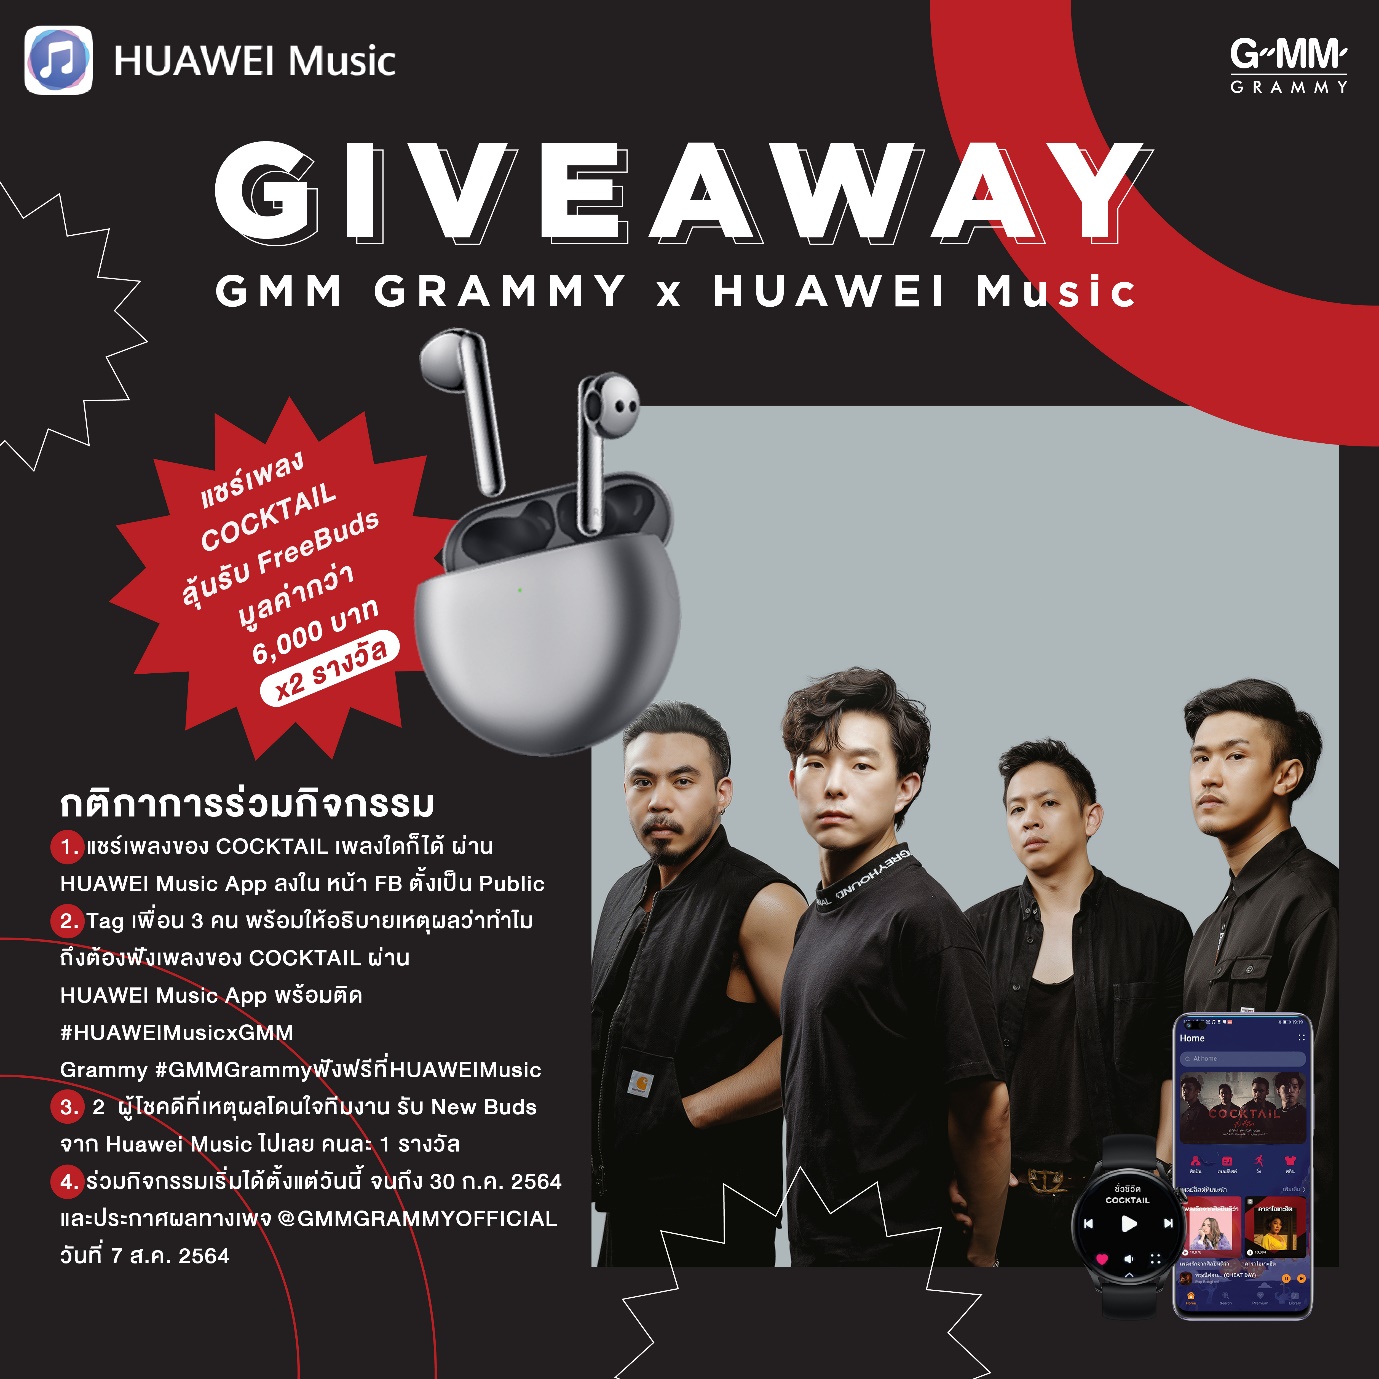 GMM Grammy sends hit songs to HUAWEI Music, an app for new listeners.